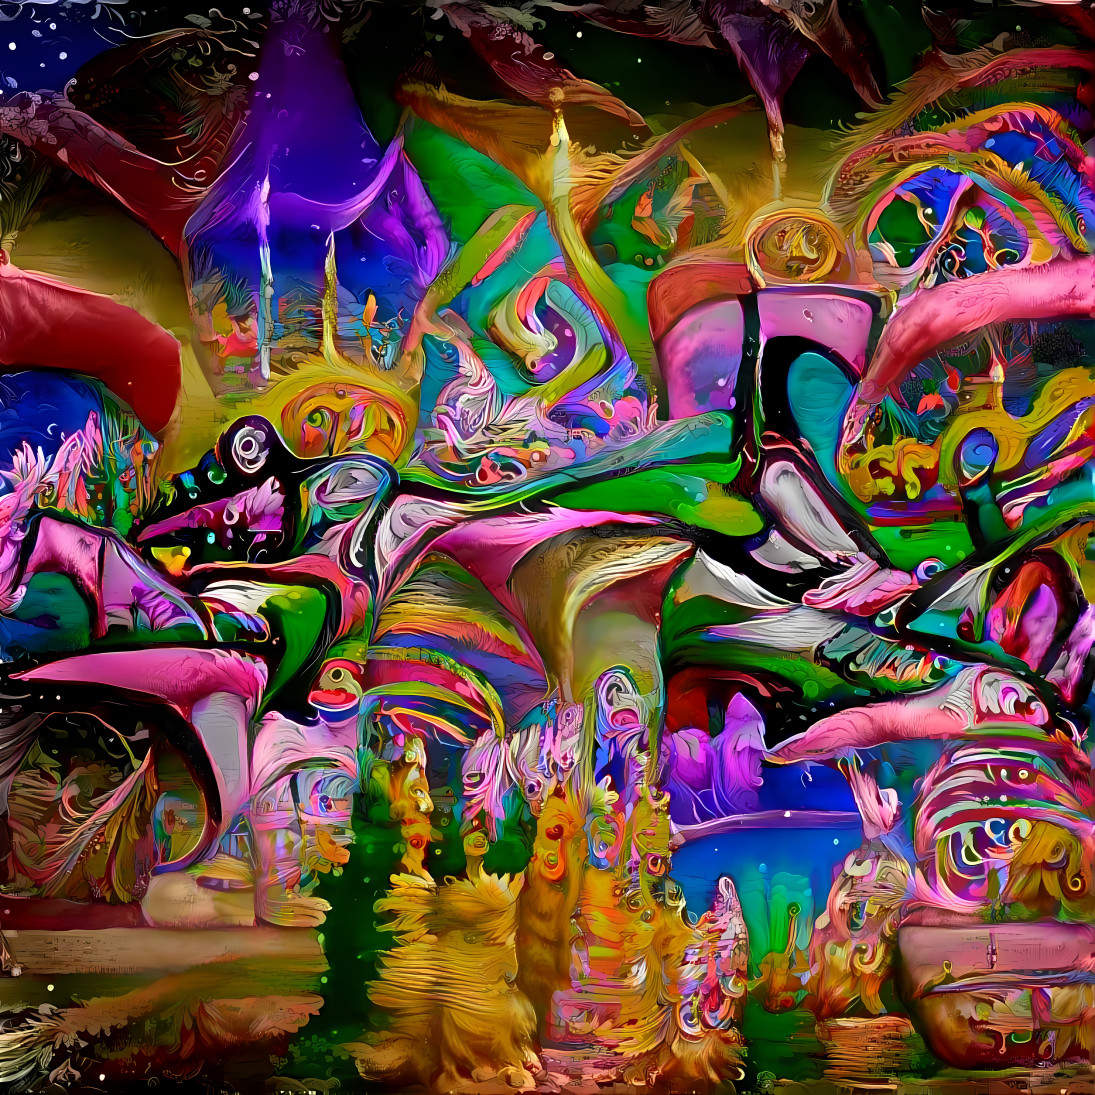 Told starry ai to dream up a photo about lsd